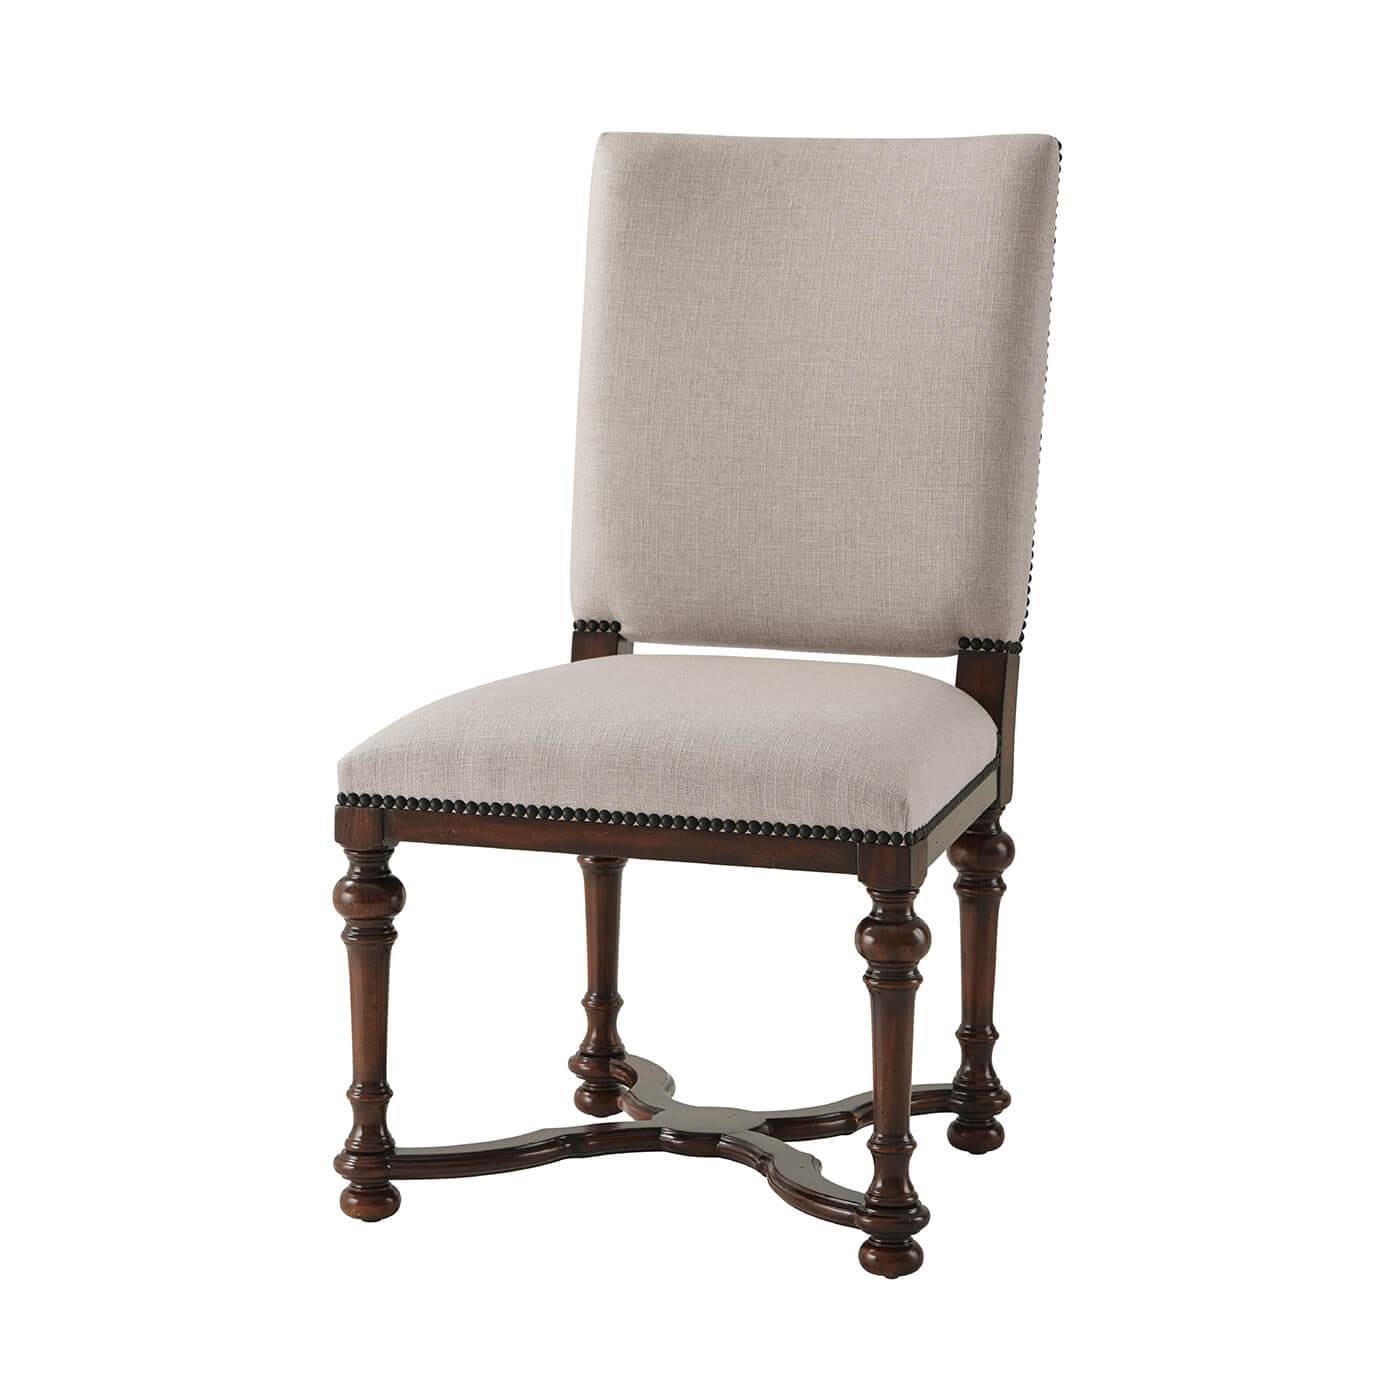 Vietnamese William and Mary Upholstered Dining Side Chairs For Sale